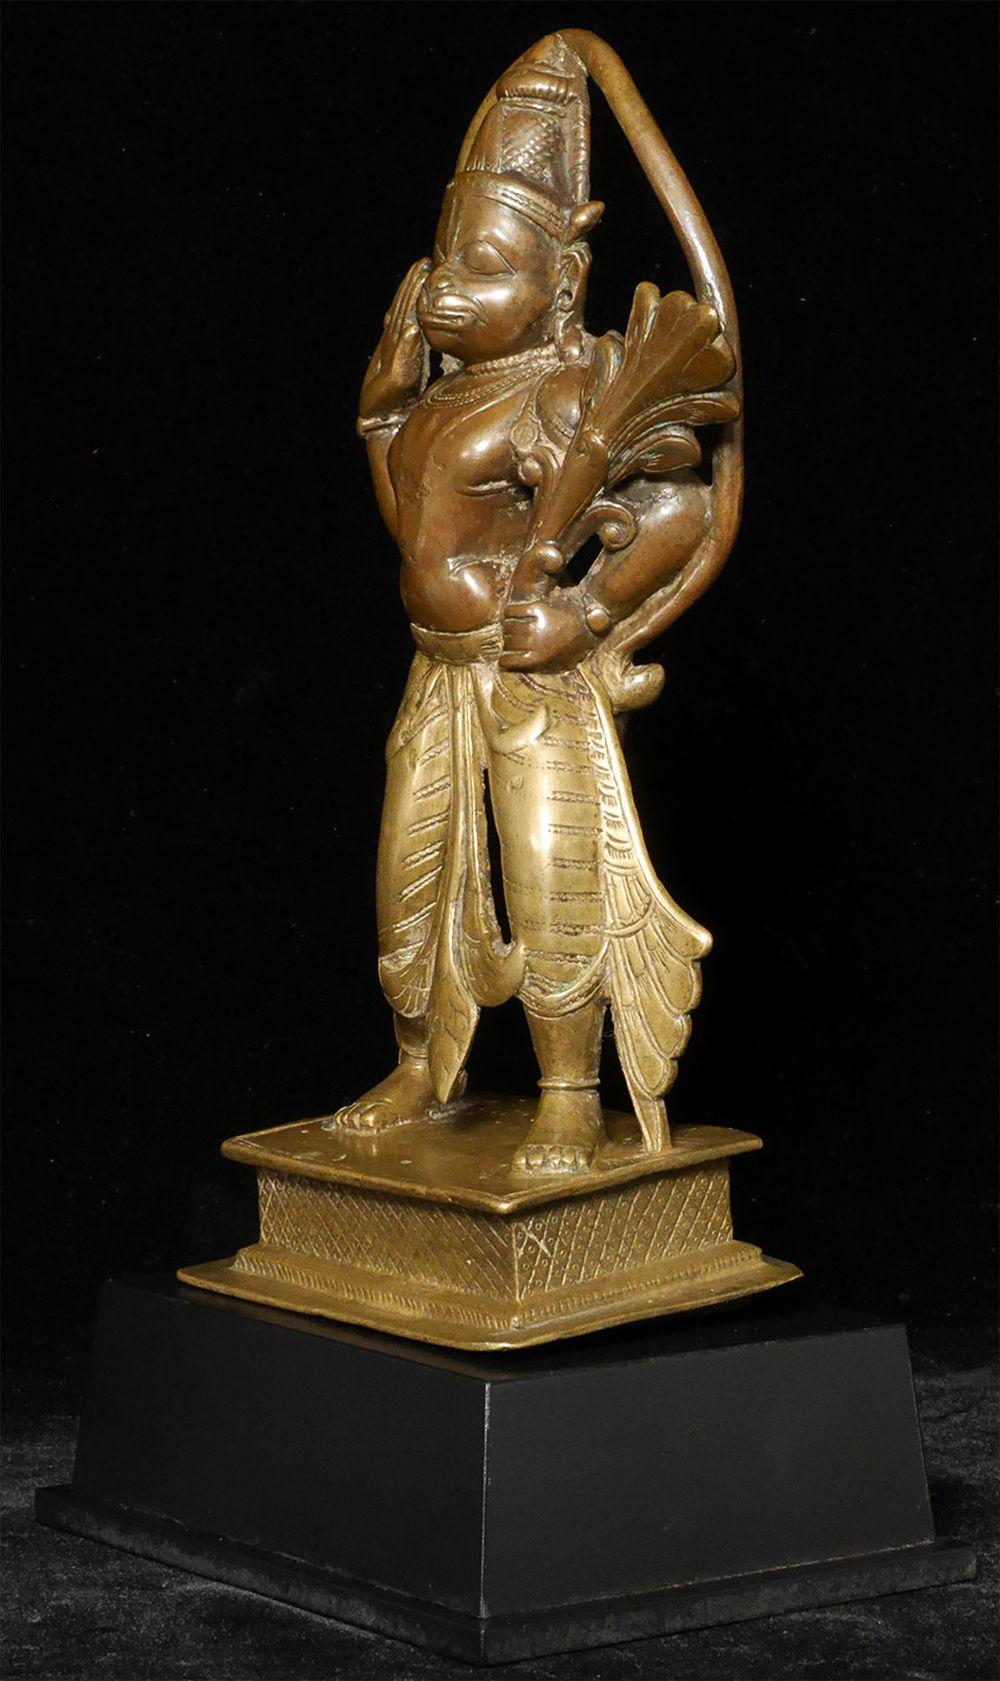 Indian 18thC Multi-Metal Hanuman, India-Superb-Old English Collection, 8020 For Sale